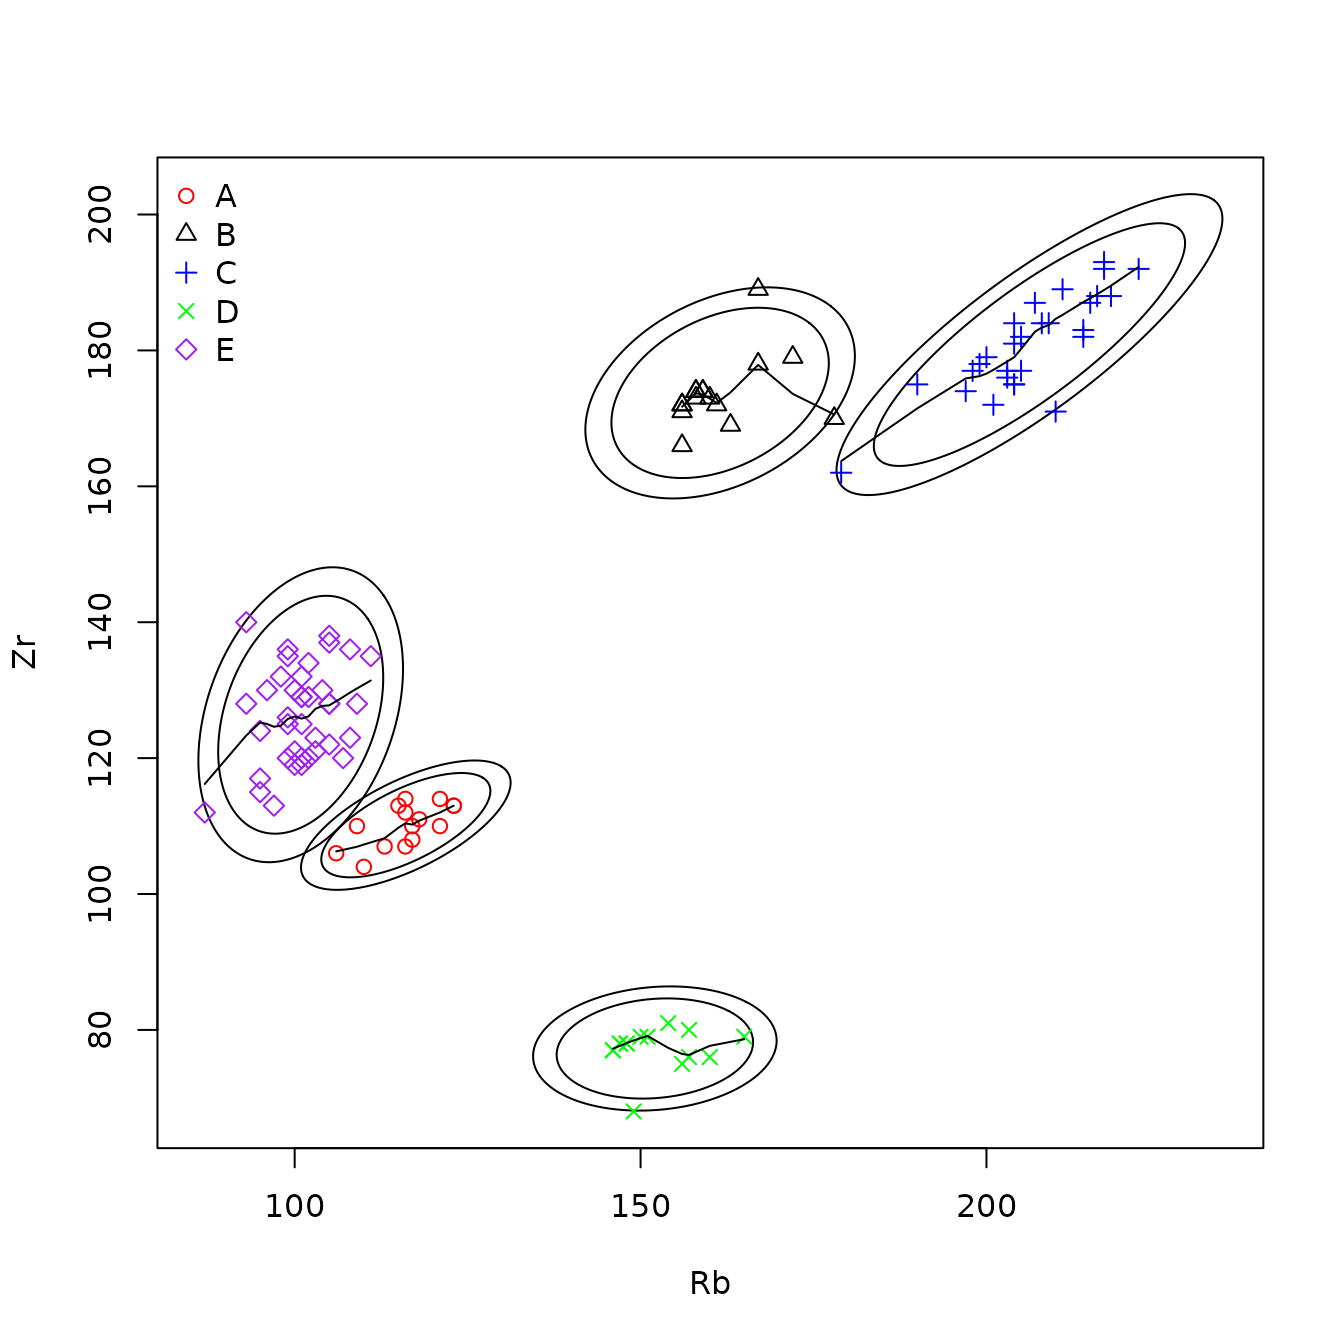 Figure 4.8: Example of a scatterplot for obsidian Jemez source data with data for all sources, with confidence ellipses and robust lowess smoothing lines.